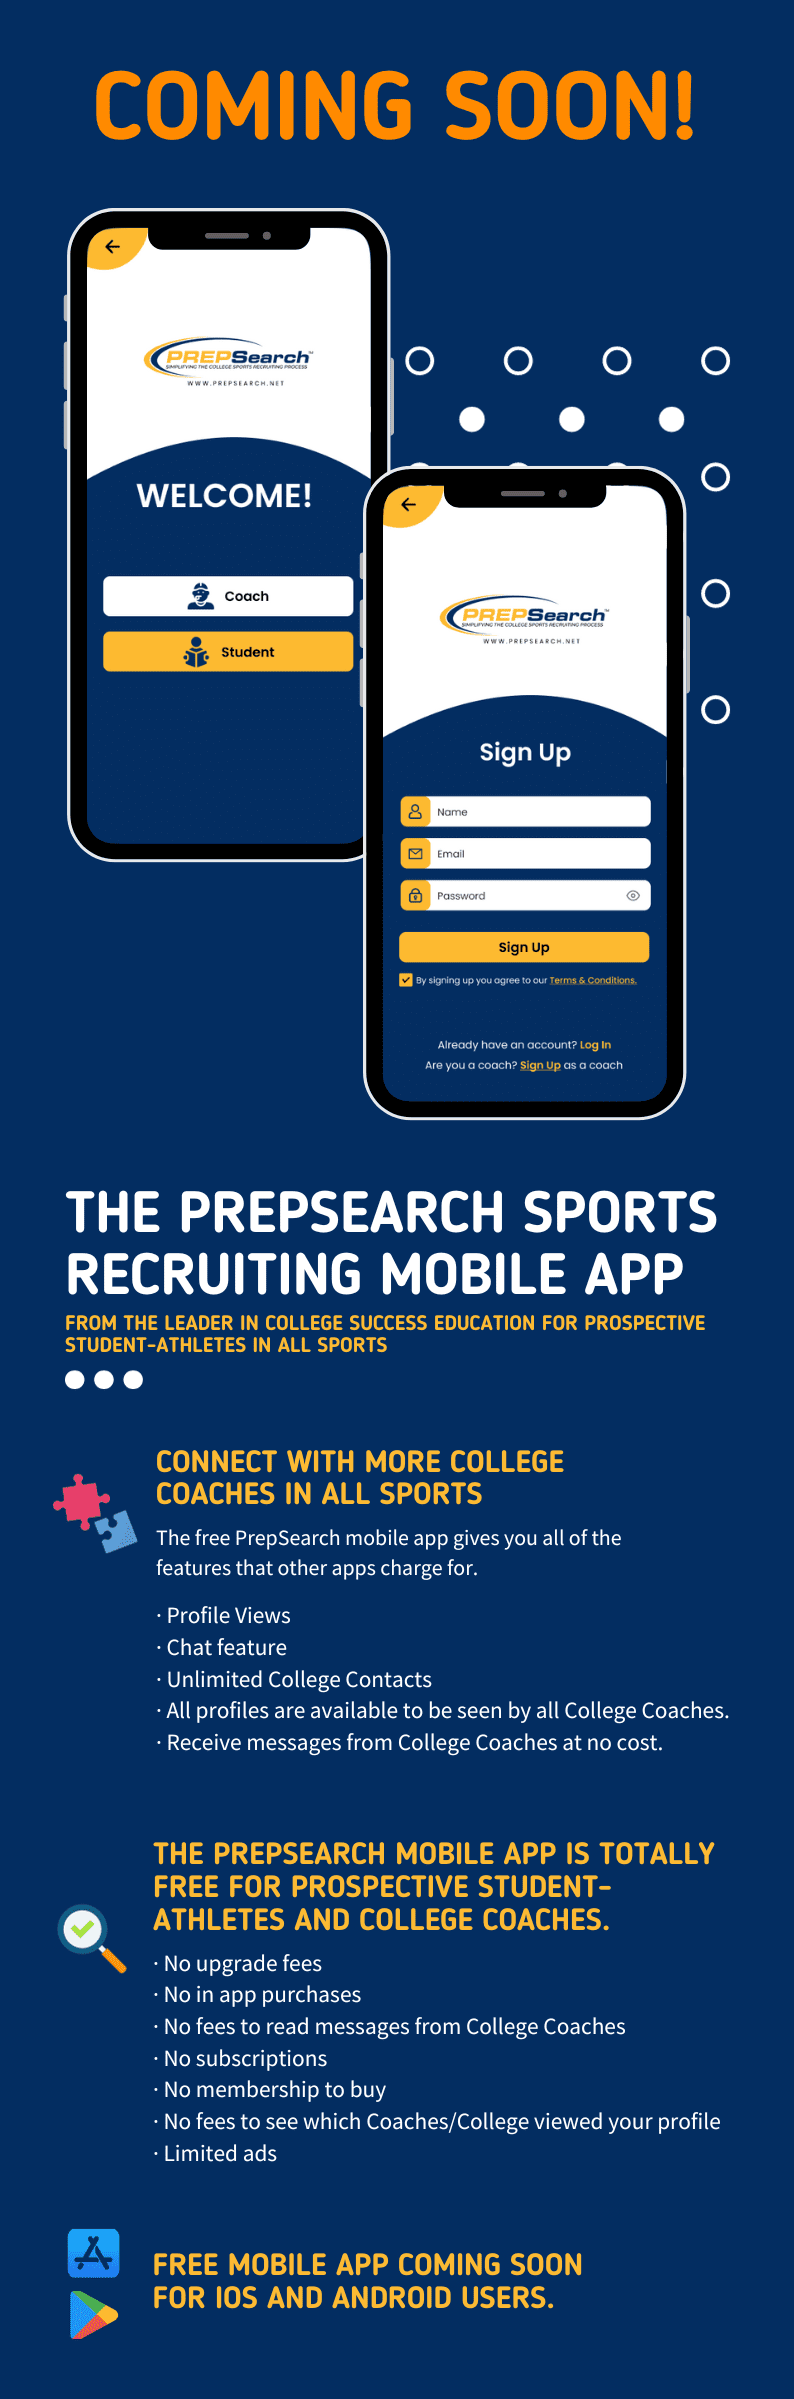 The free PrepSearch mobile app gives you all of the features that other apps charge for. (1)